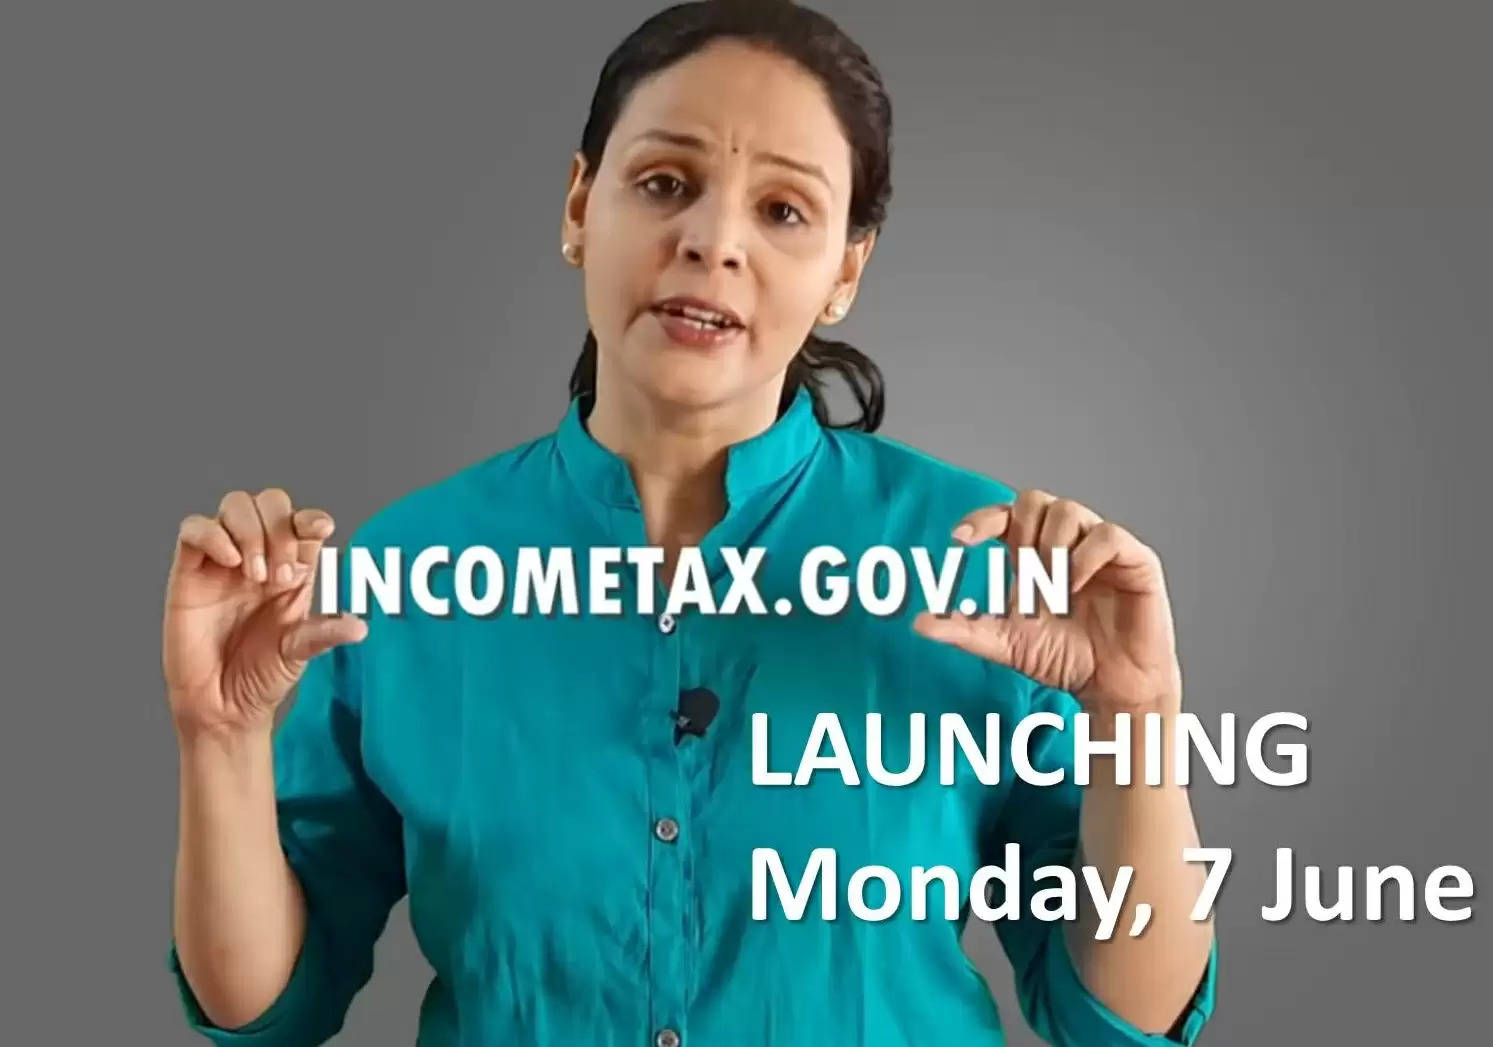 new income tax site when is the news income tax site going to launch 7 june pay income tax online